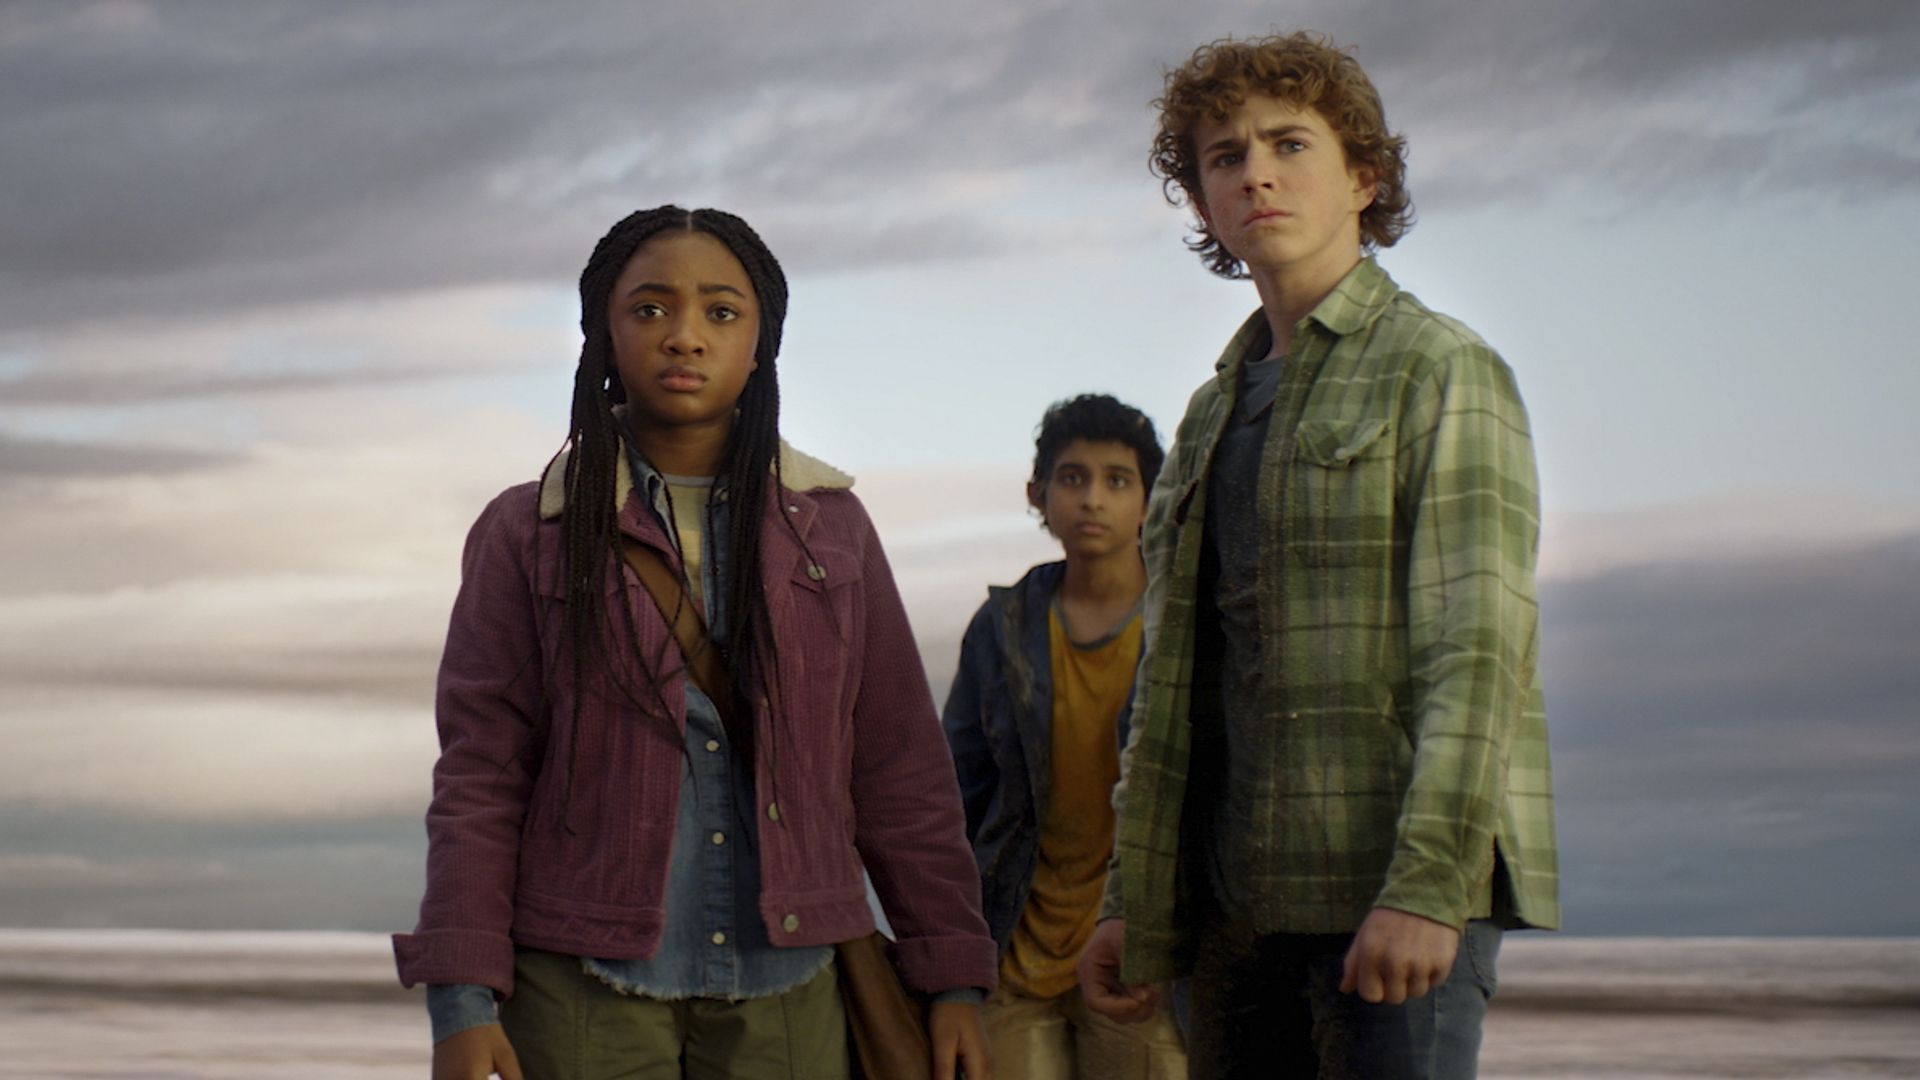 Leah Sava Jeffries, Walker Scobell and Aryan Simhadri in Percy Jackson and the Olympians